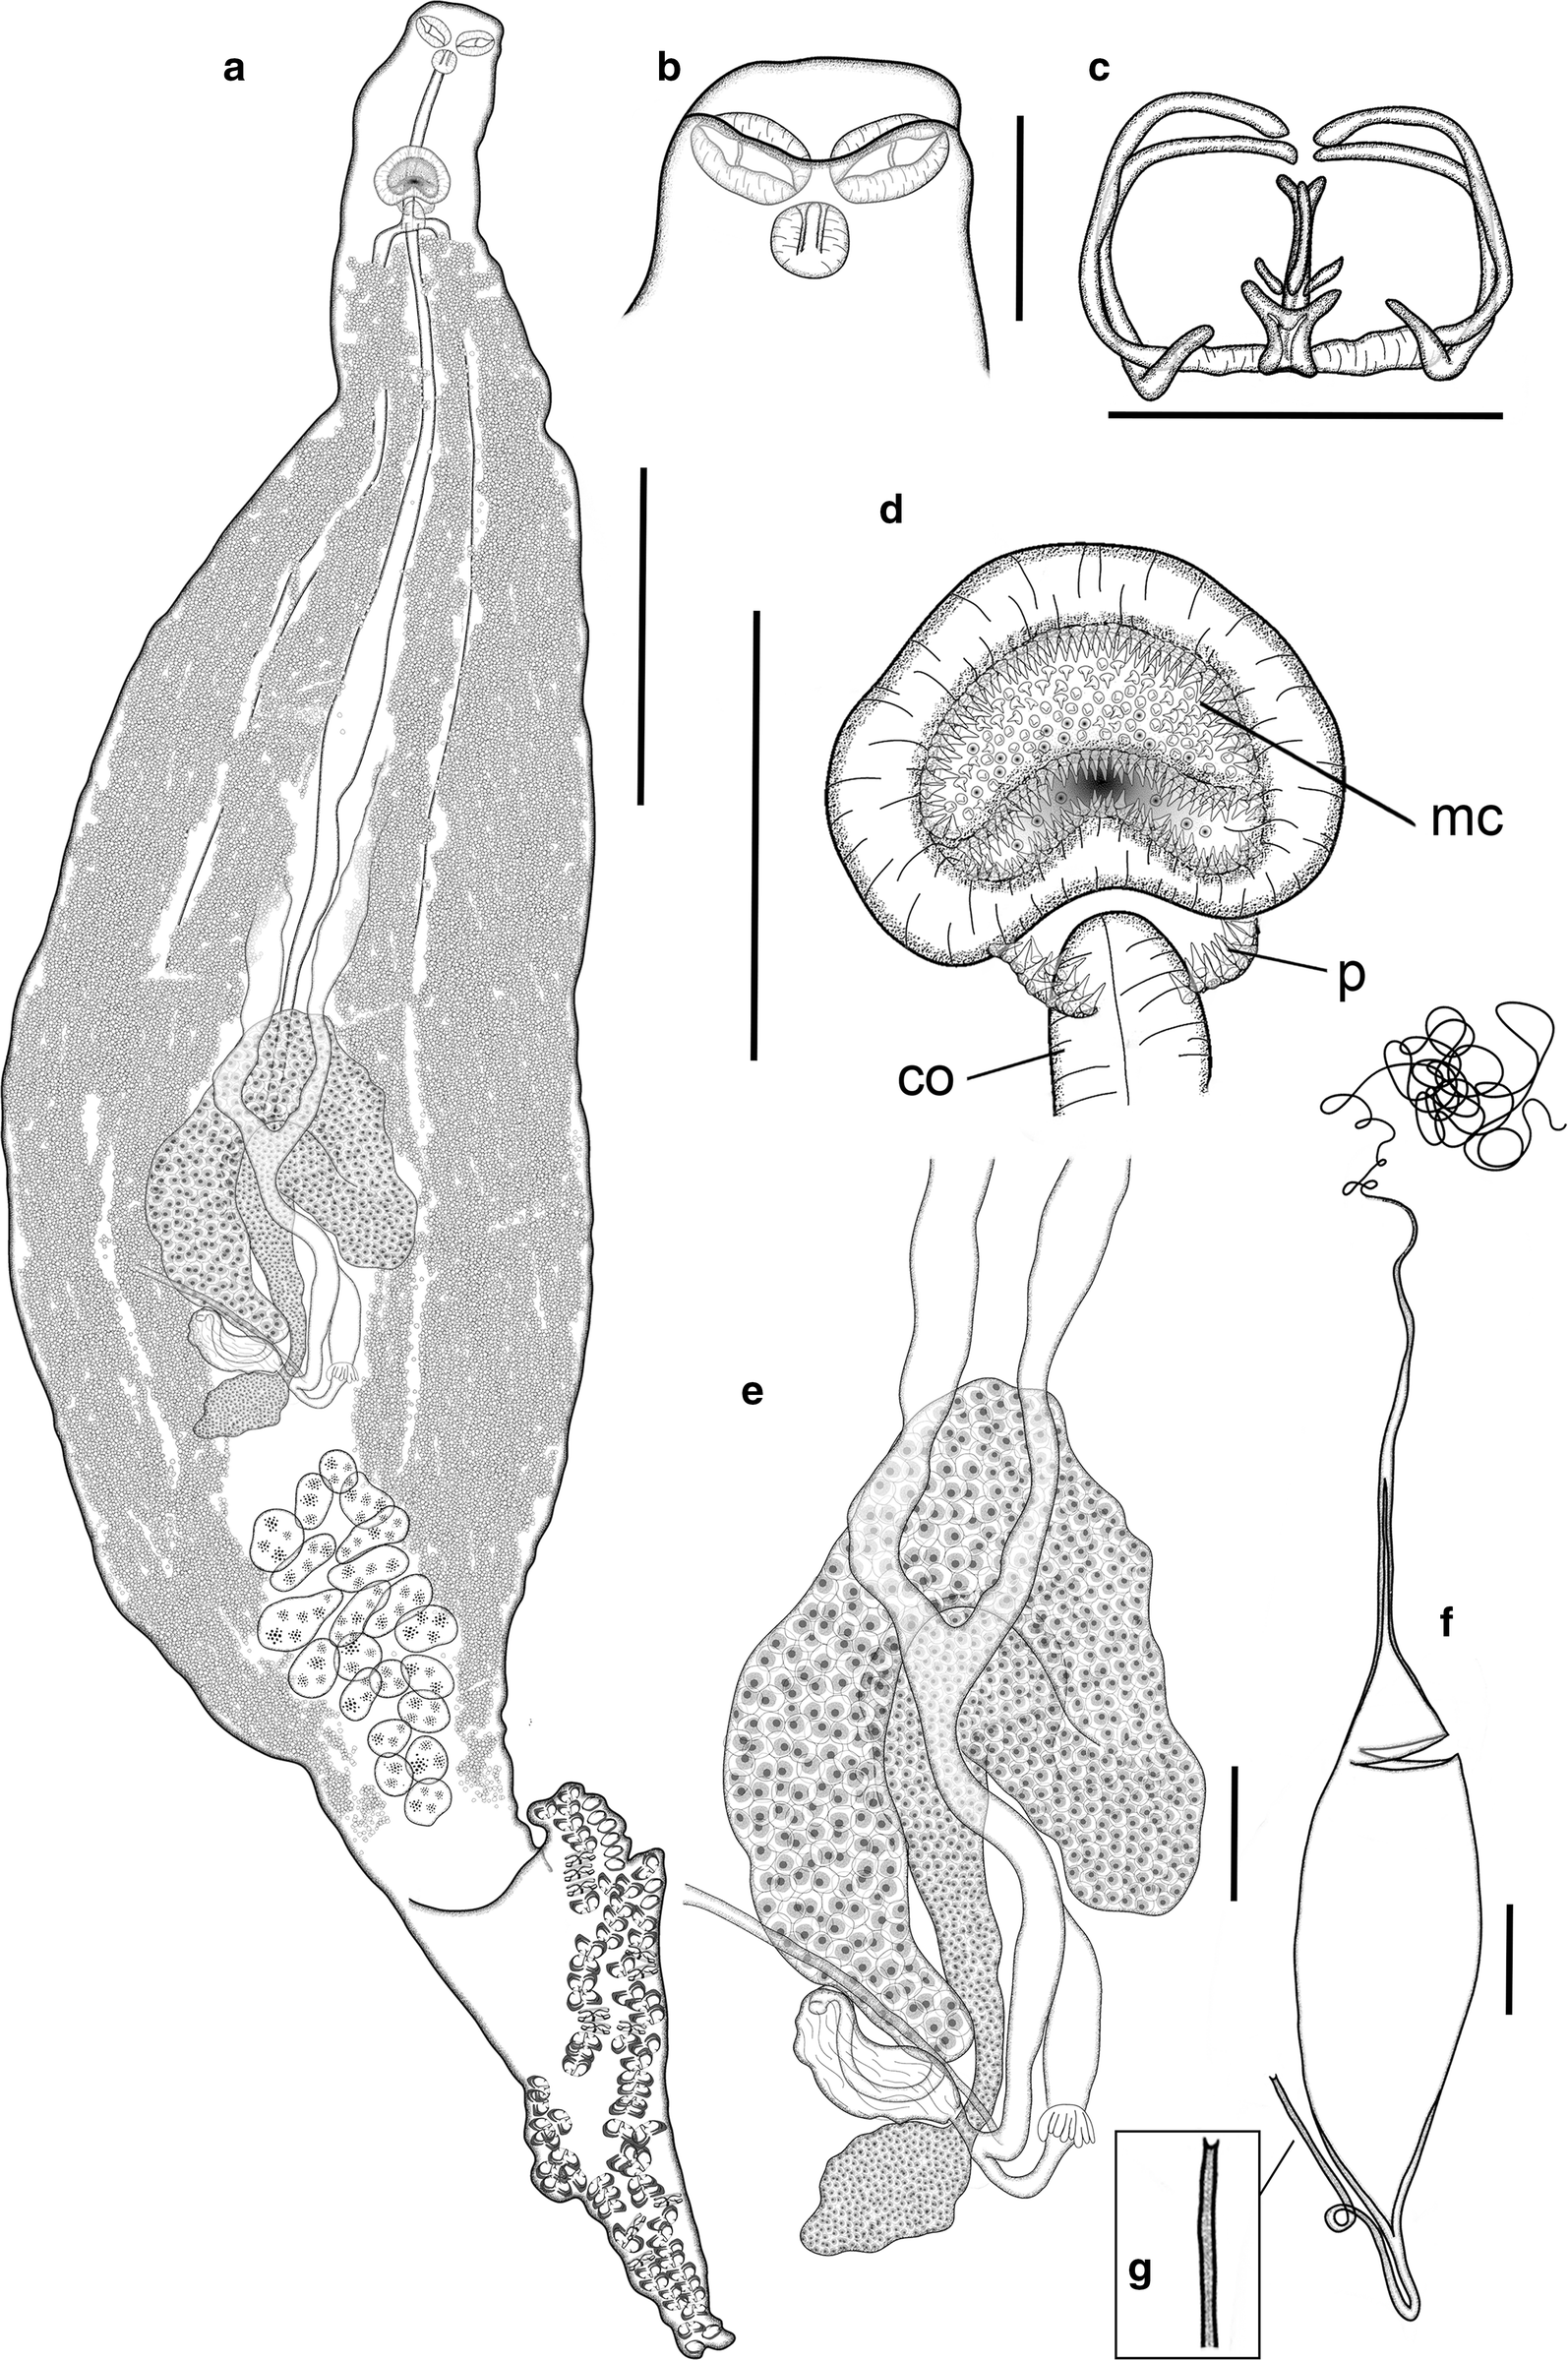 Fig. 5